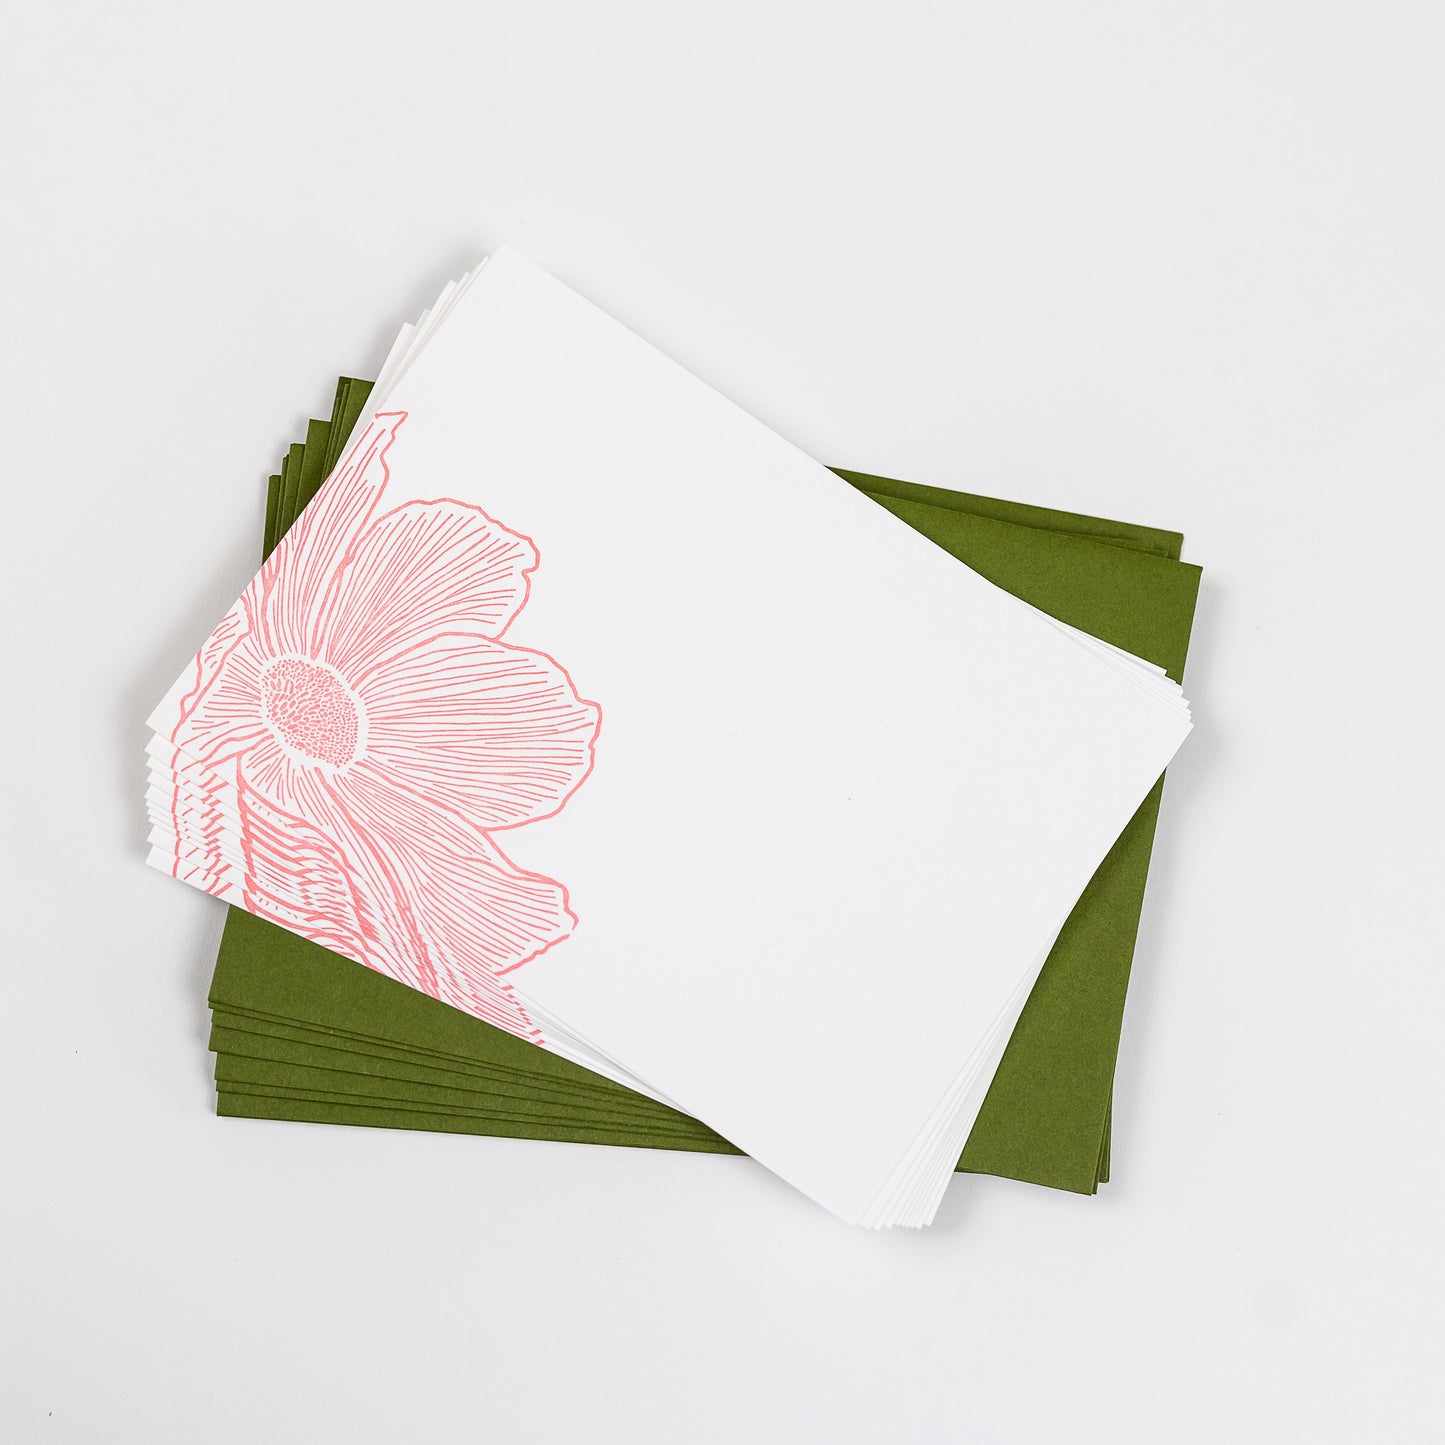 Set of 10 Letterpress Note Cards featuring a hand-drawn cosmos flower, letterpress printed in a soft peachy-pink ink onto 100% cotton paper. Includes 10 rich green envelopes. Size A6.  